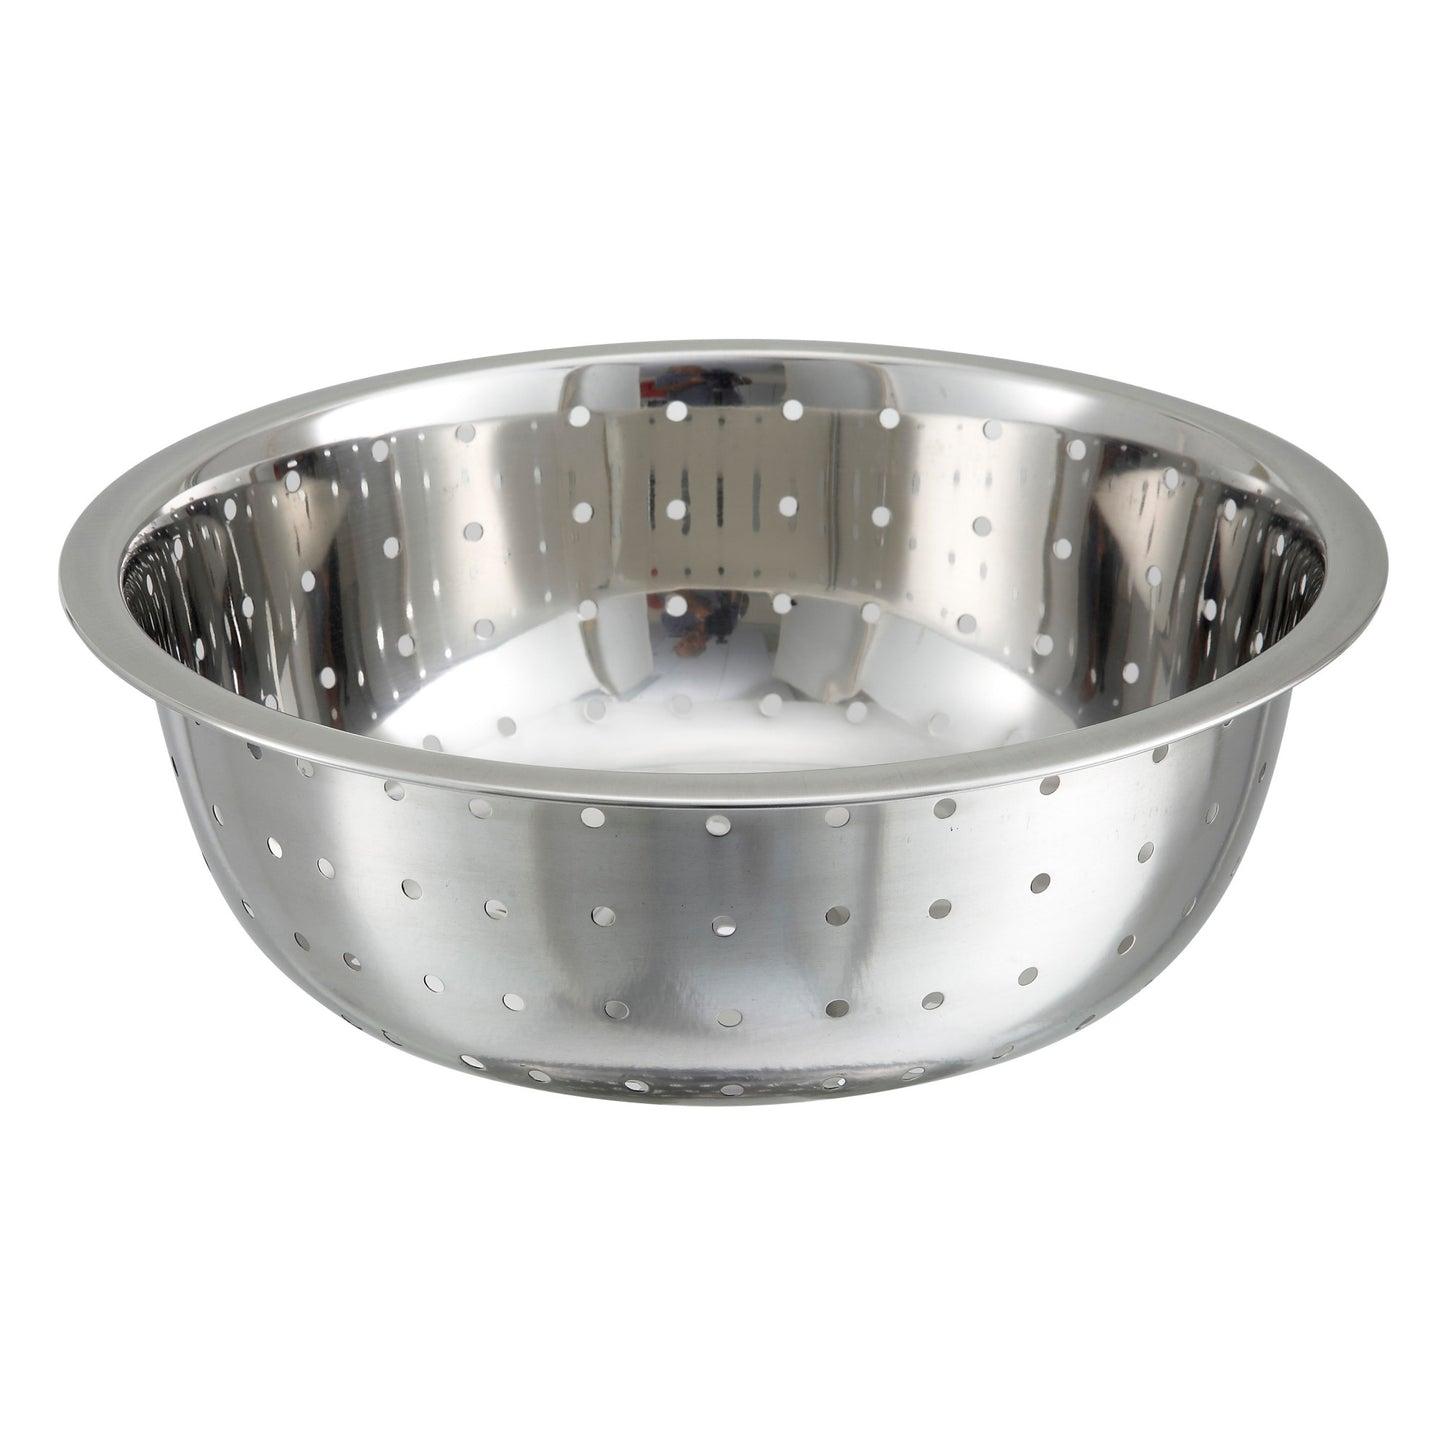 CCOD-13L - 13" Diameter Stainless Steel Chinese-Style Colander with 5 mm Drain Holes